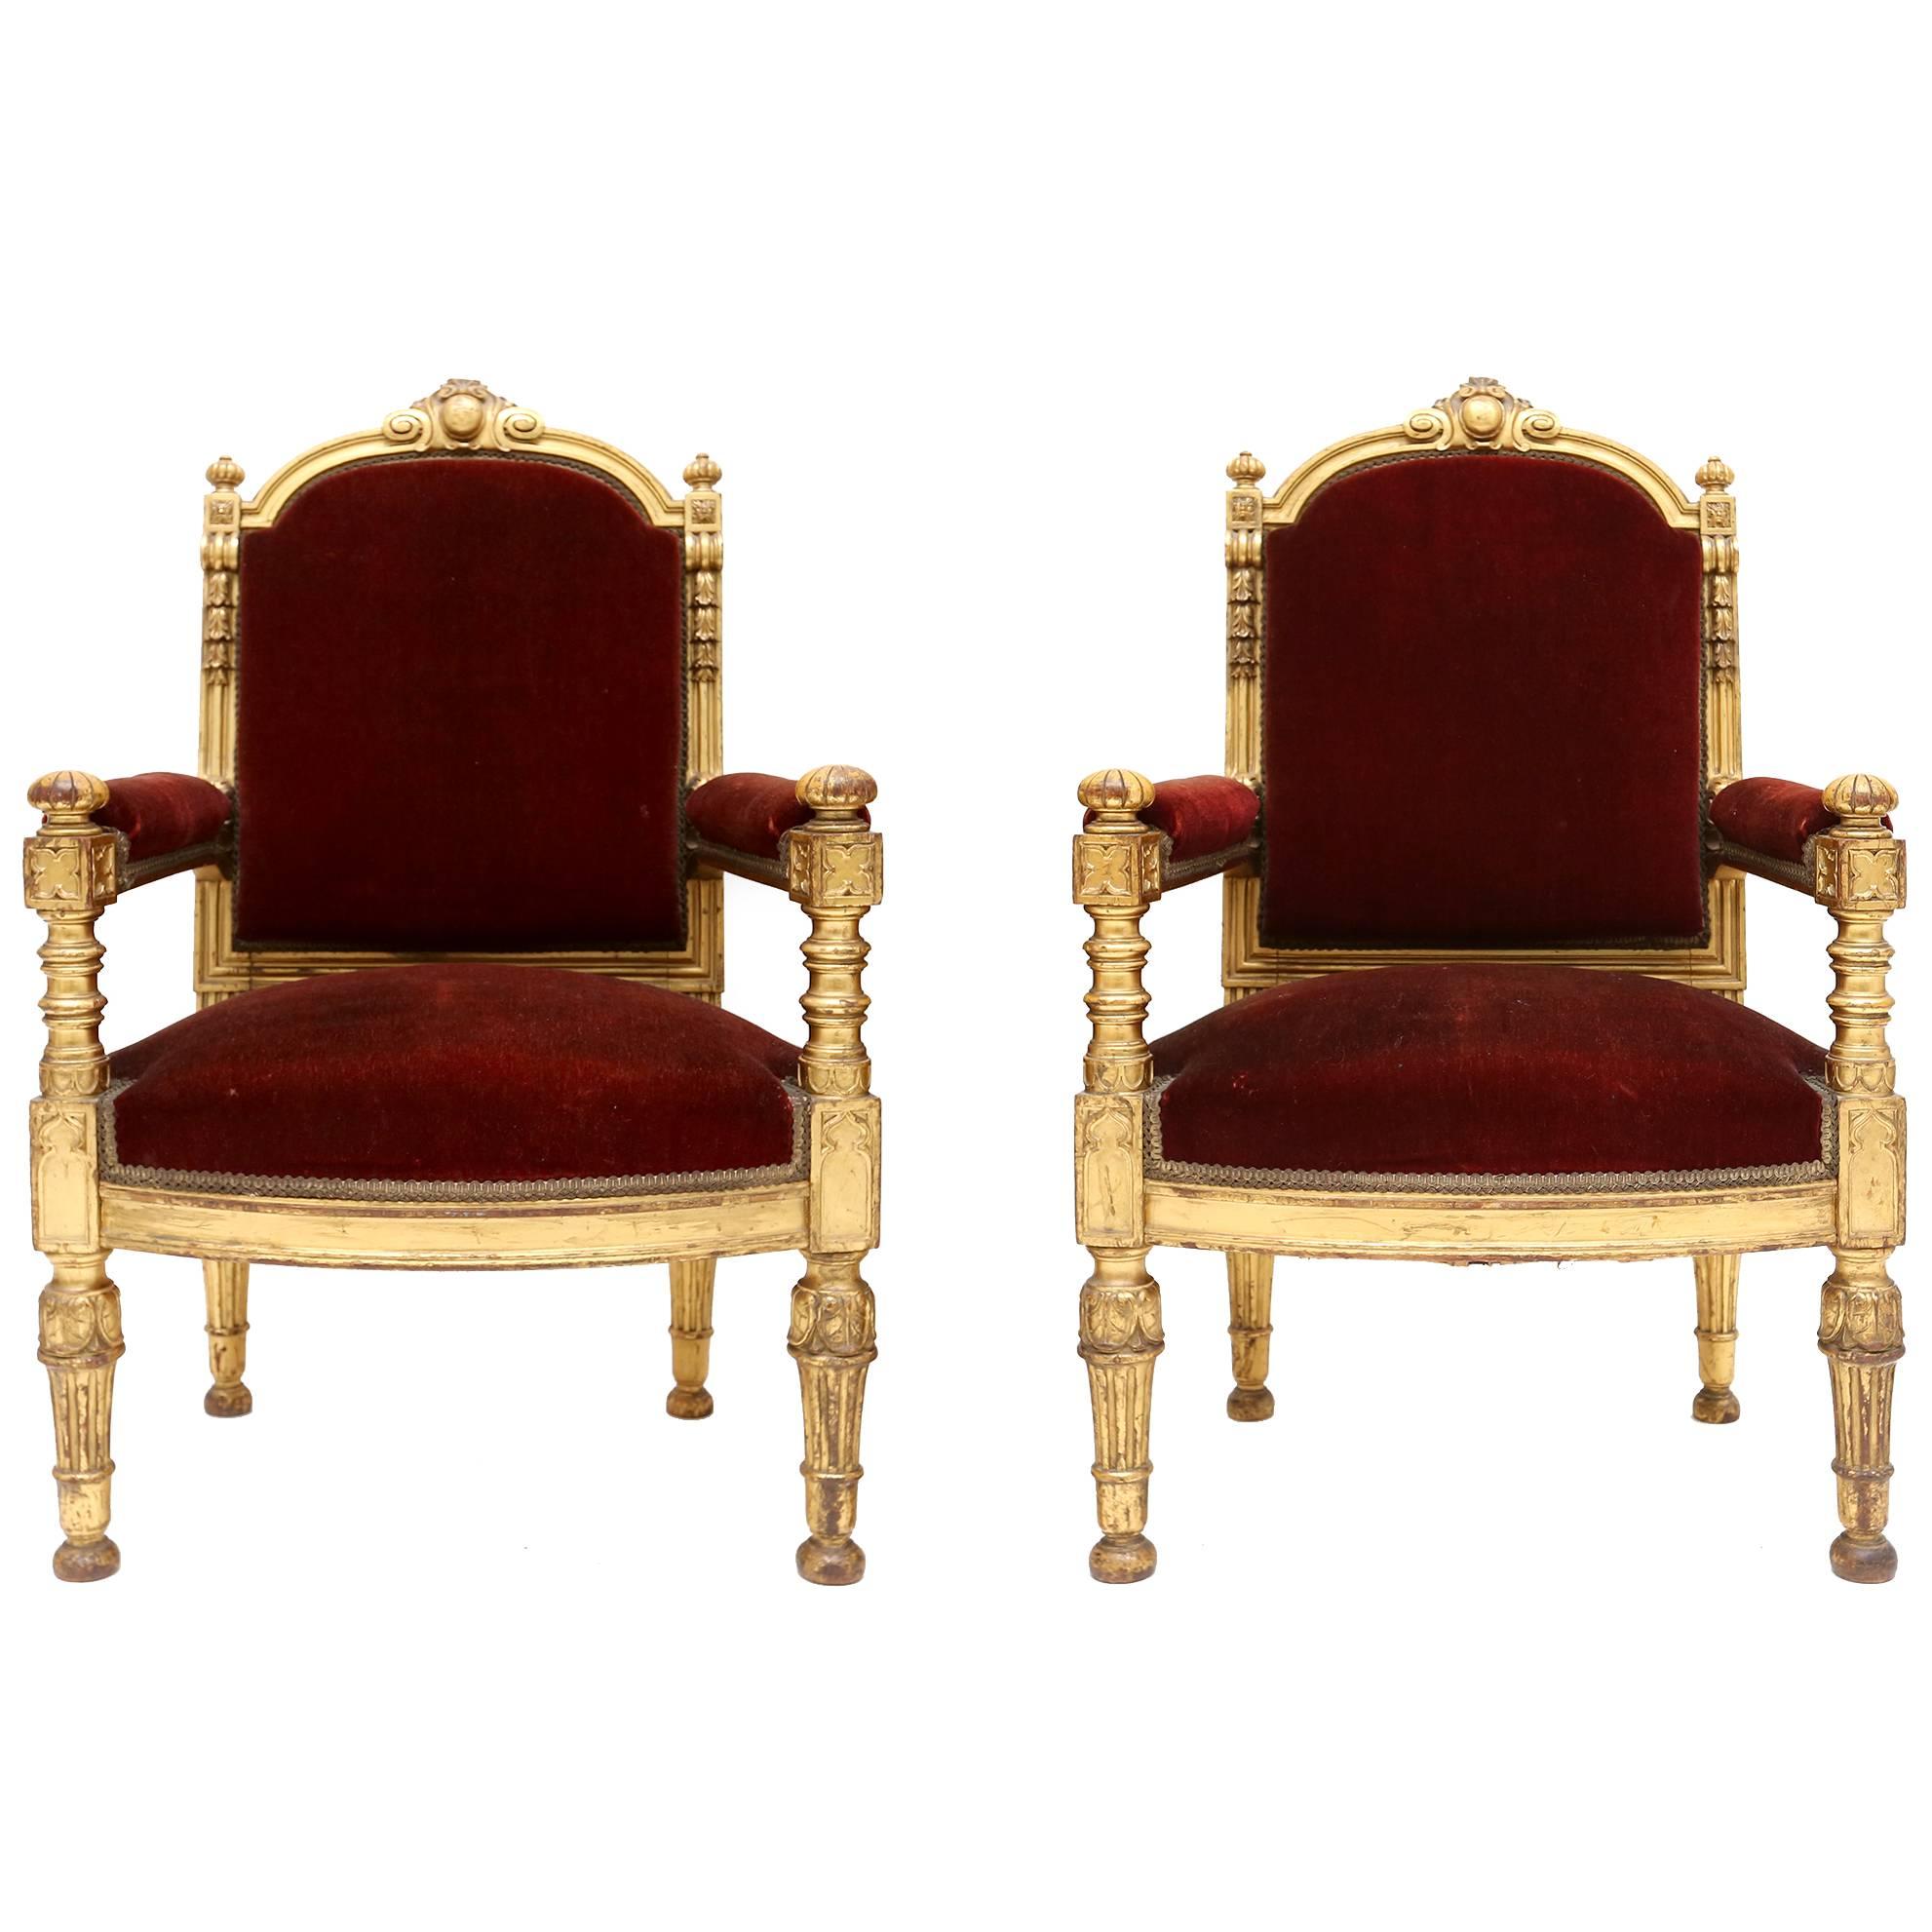 Antique neoclassical Giltwood and Velvet Armchairs